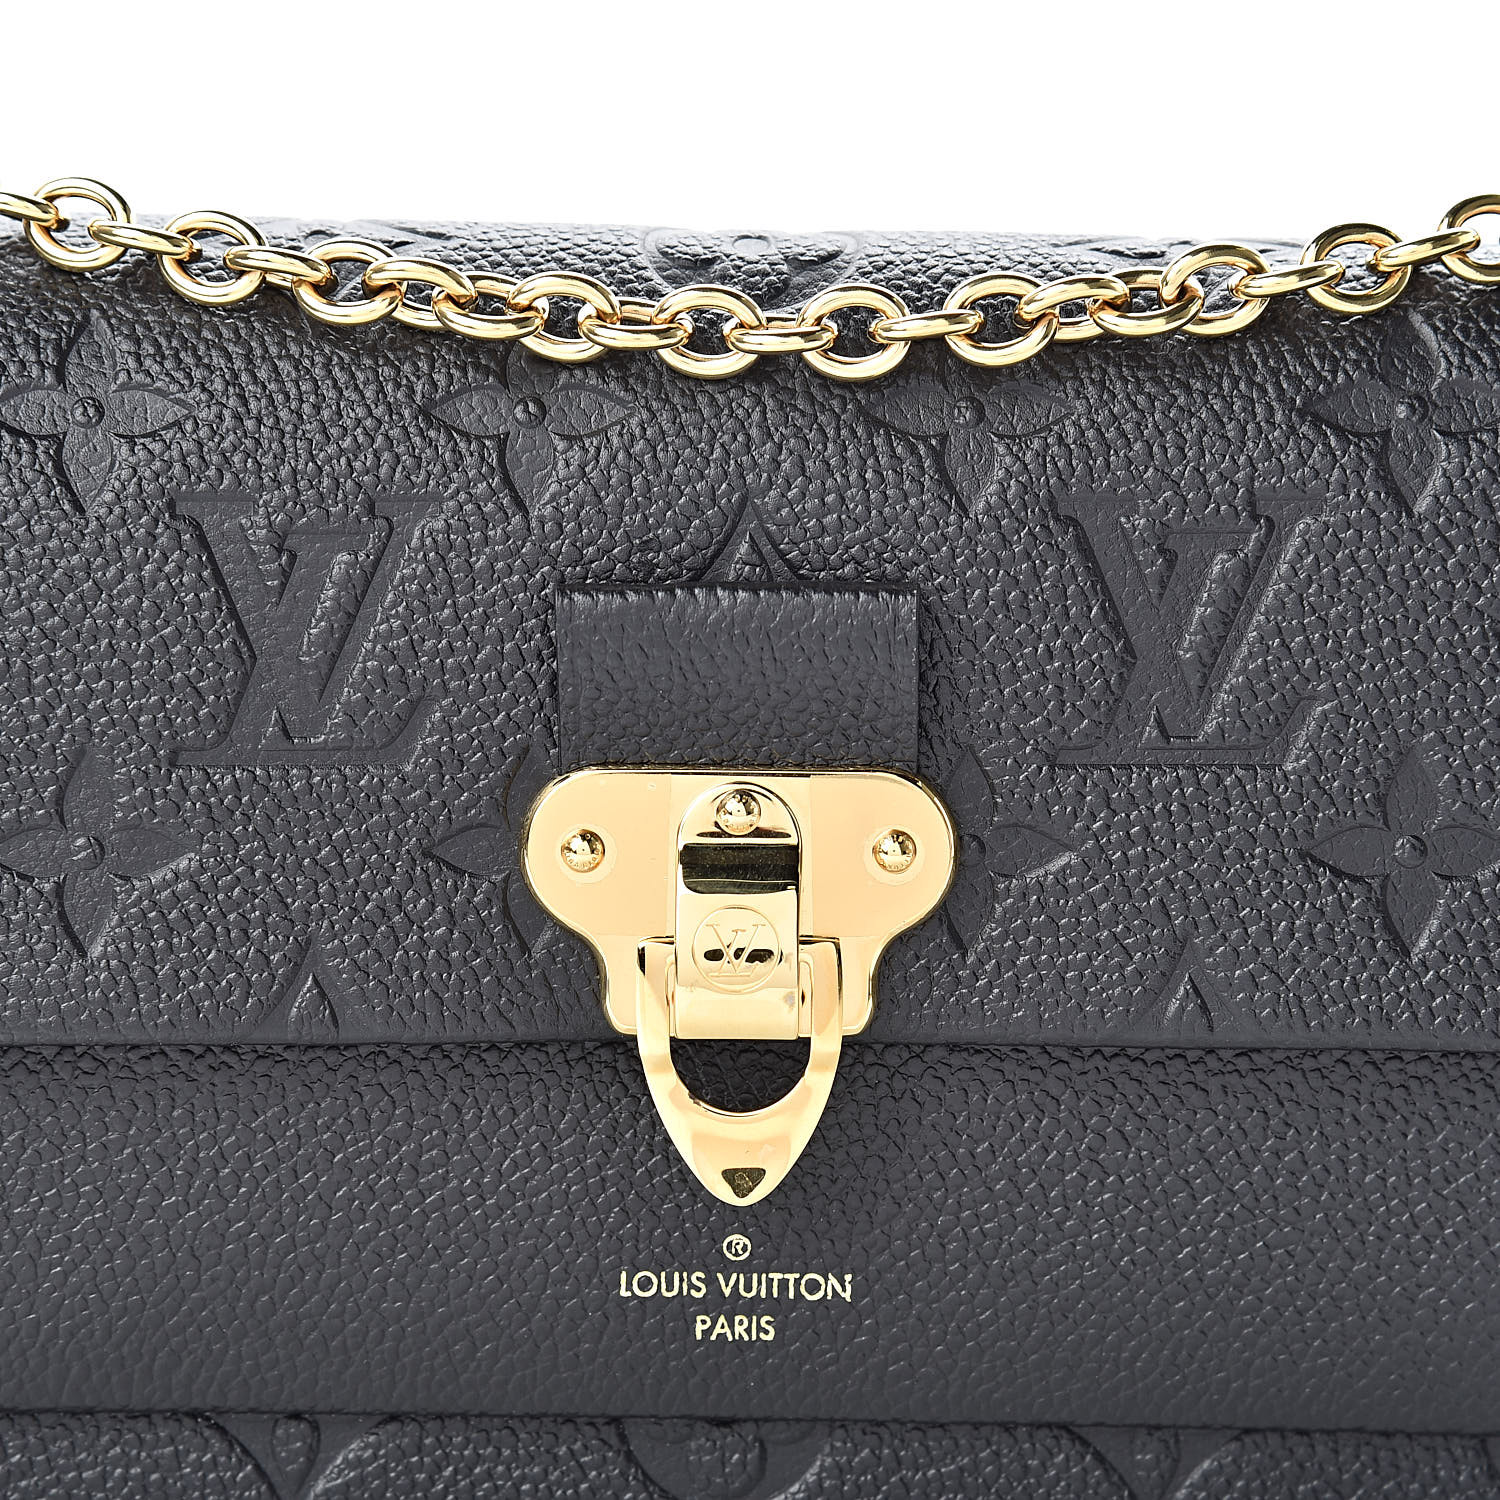 Vavin Chain Wallet Empreinte Reveal/Review, What Fits, Pic Heavy!!